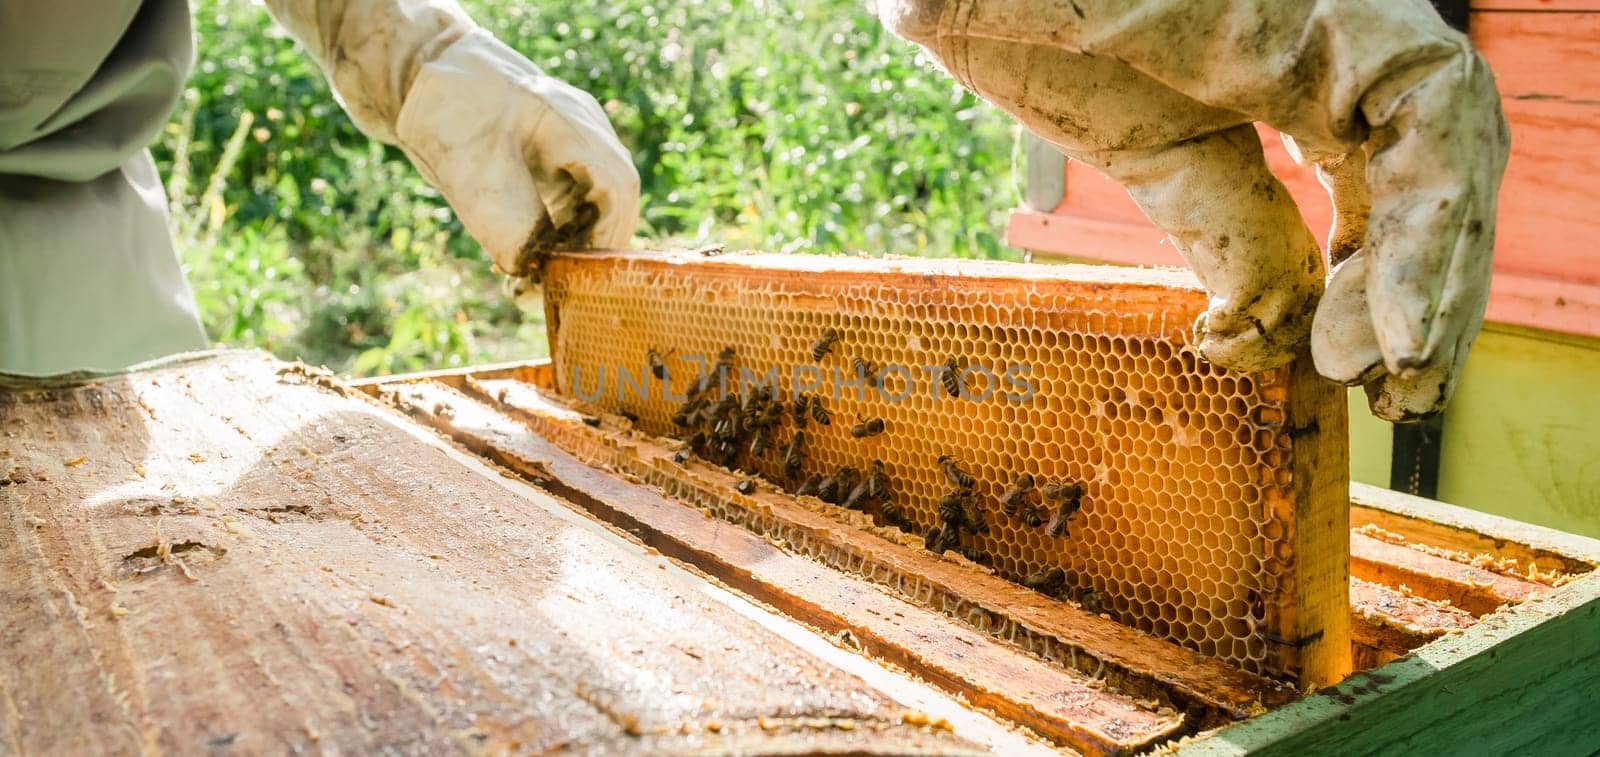 Beekeeper removing honeycomb from beehive. Person in beekeeper suit taking honey from hive. Farmer wearing bee suit working with honeycomb in apiary. Beekeeping in countryside. Organic farming concept